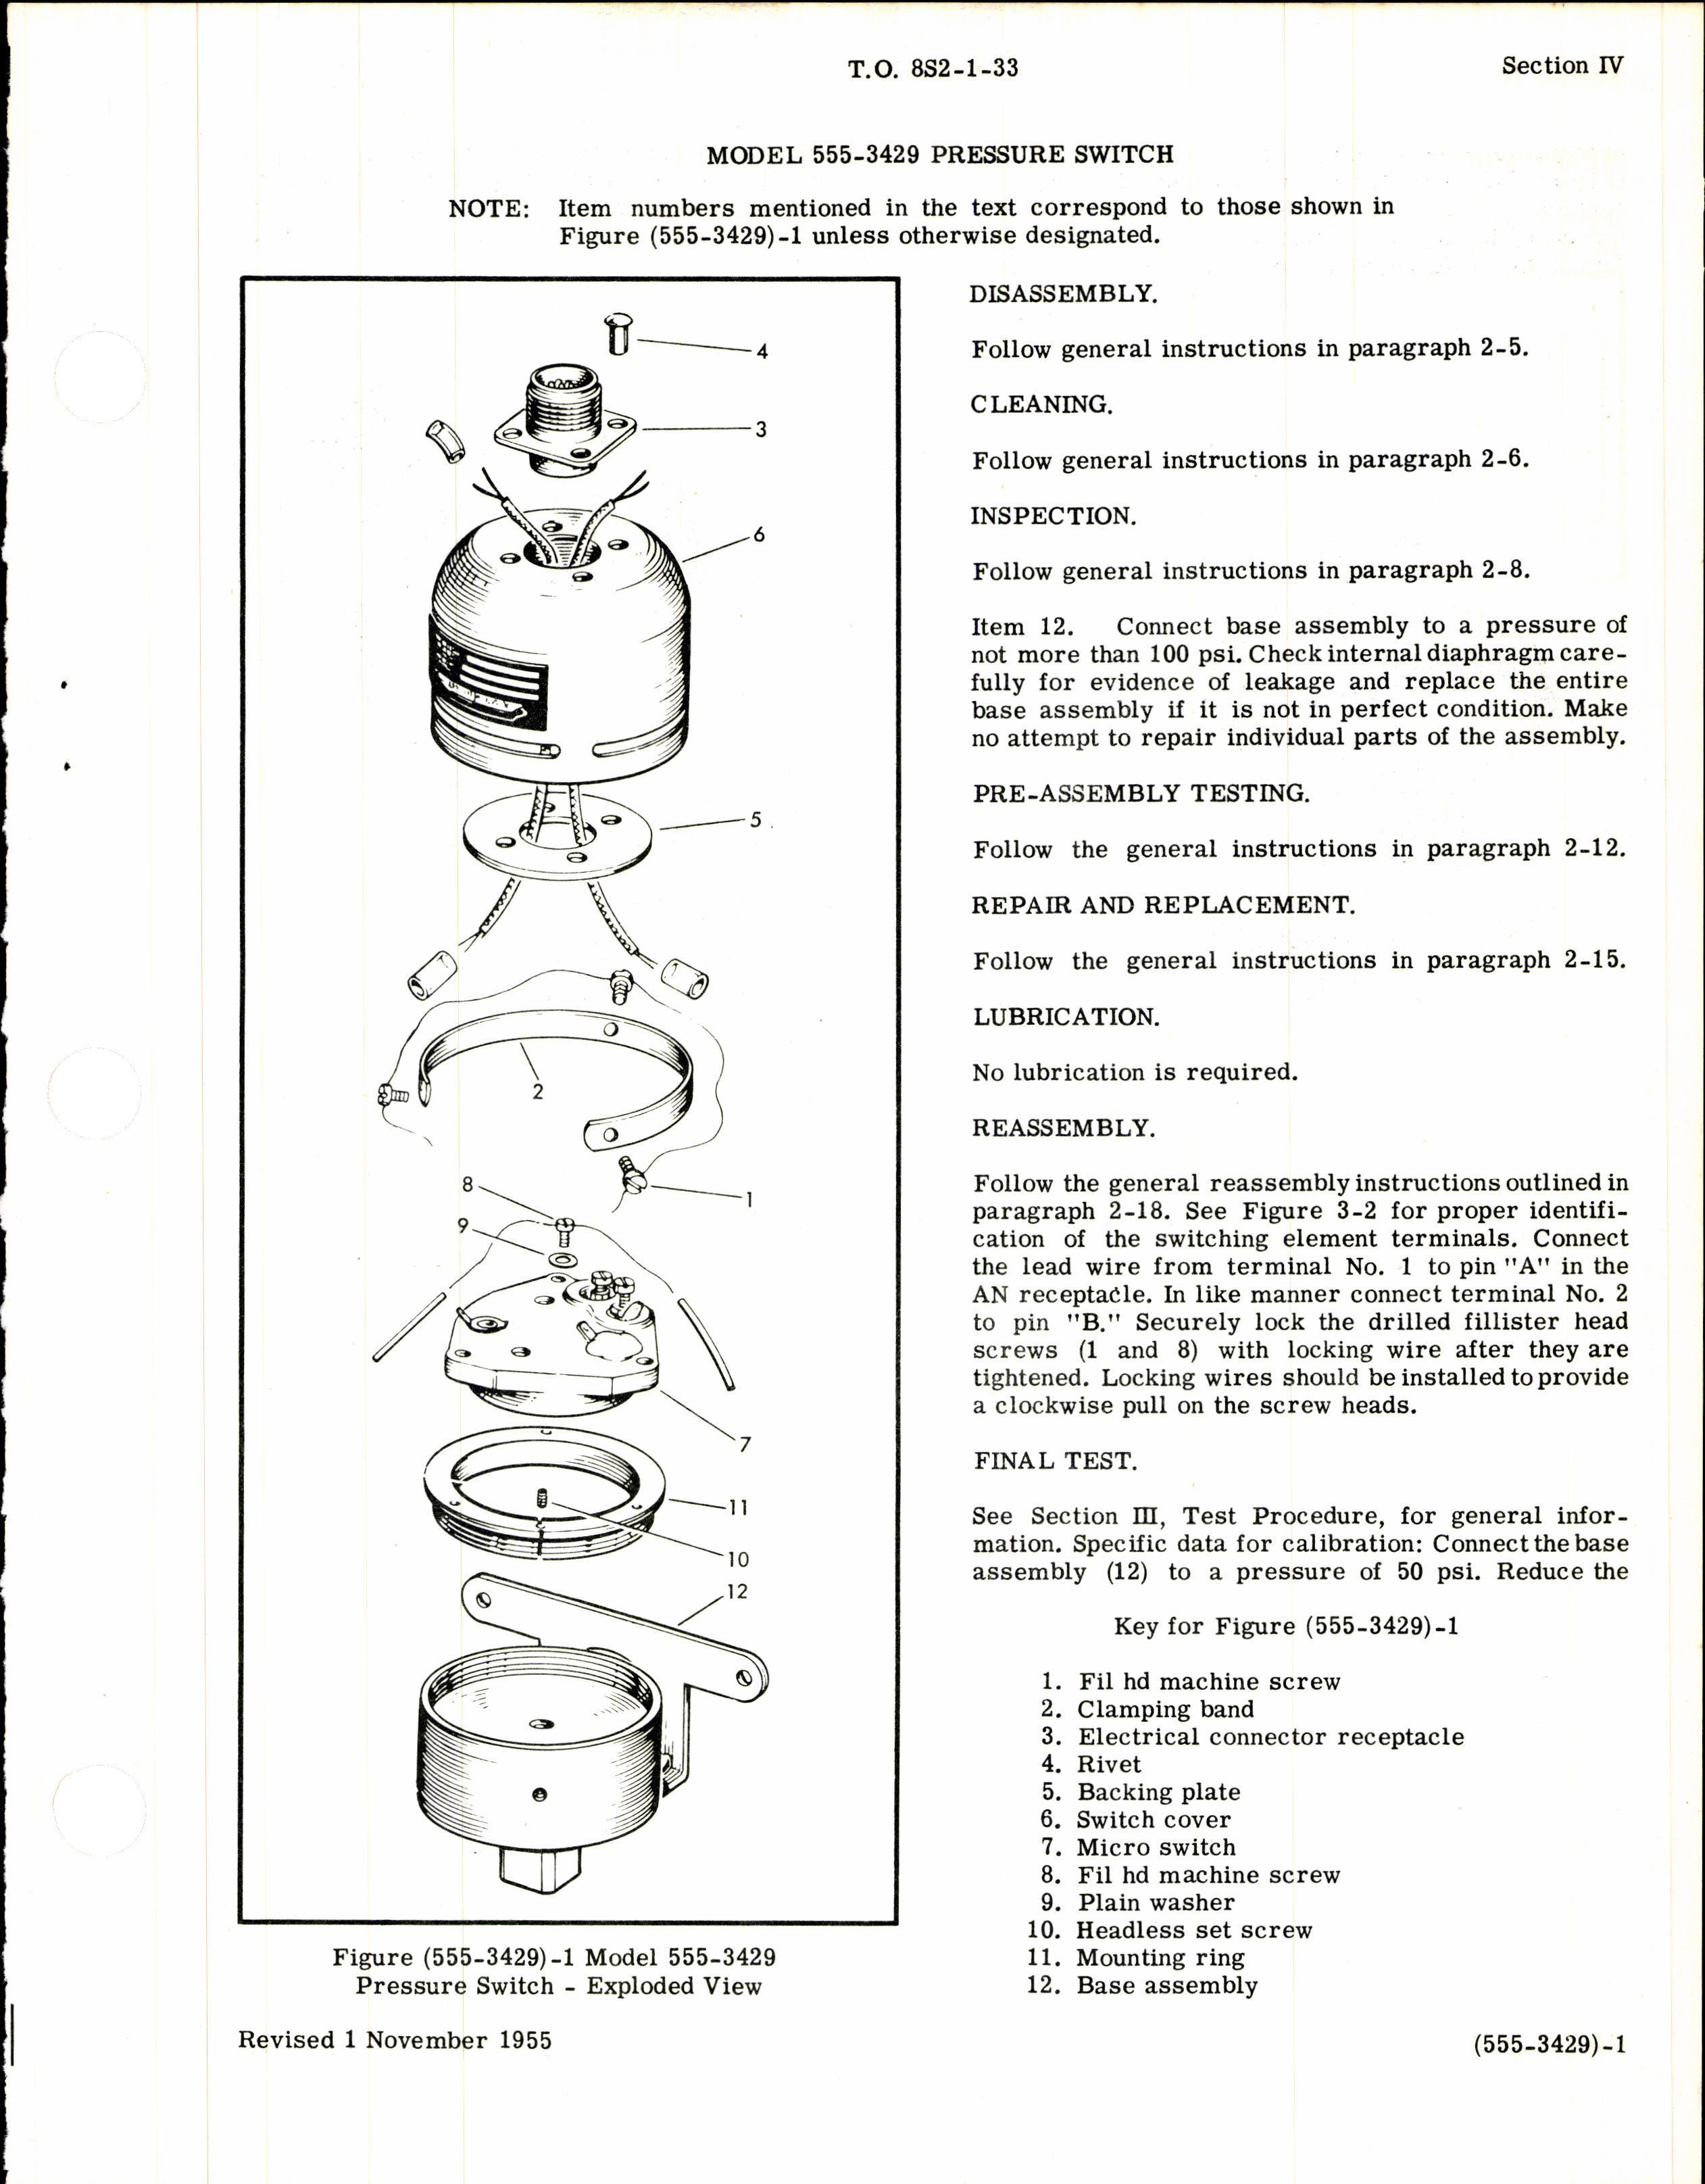 Sample page 7 from AirCorps Library document: Overhaul Instructions for Cook Pressure Control Switches